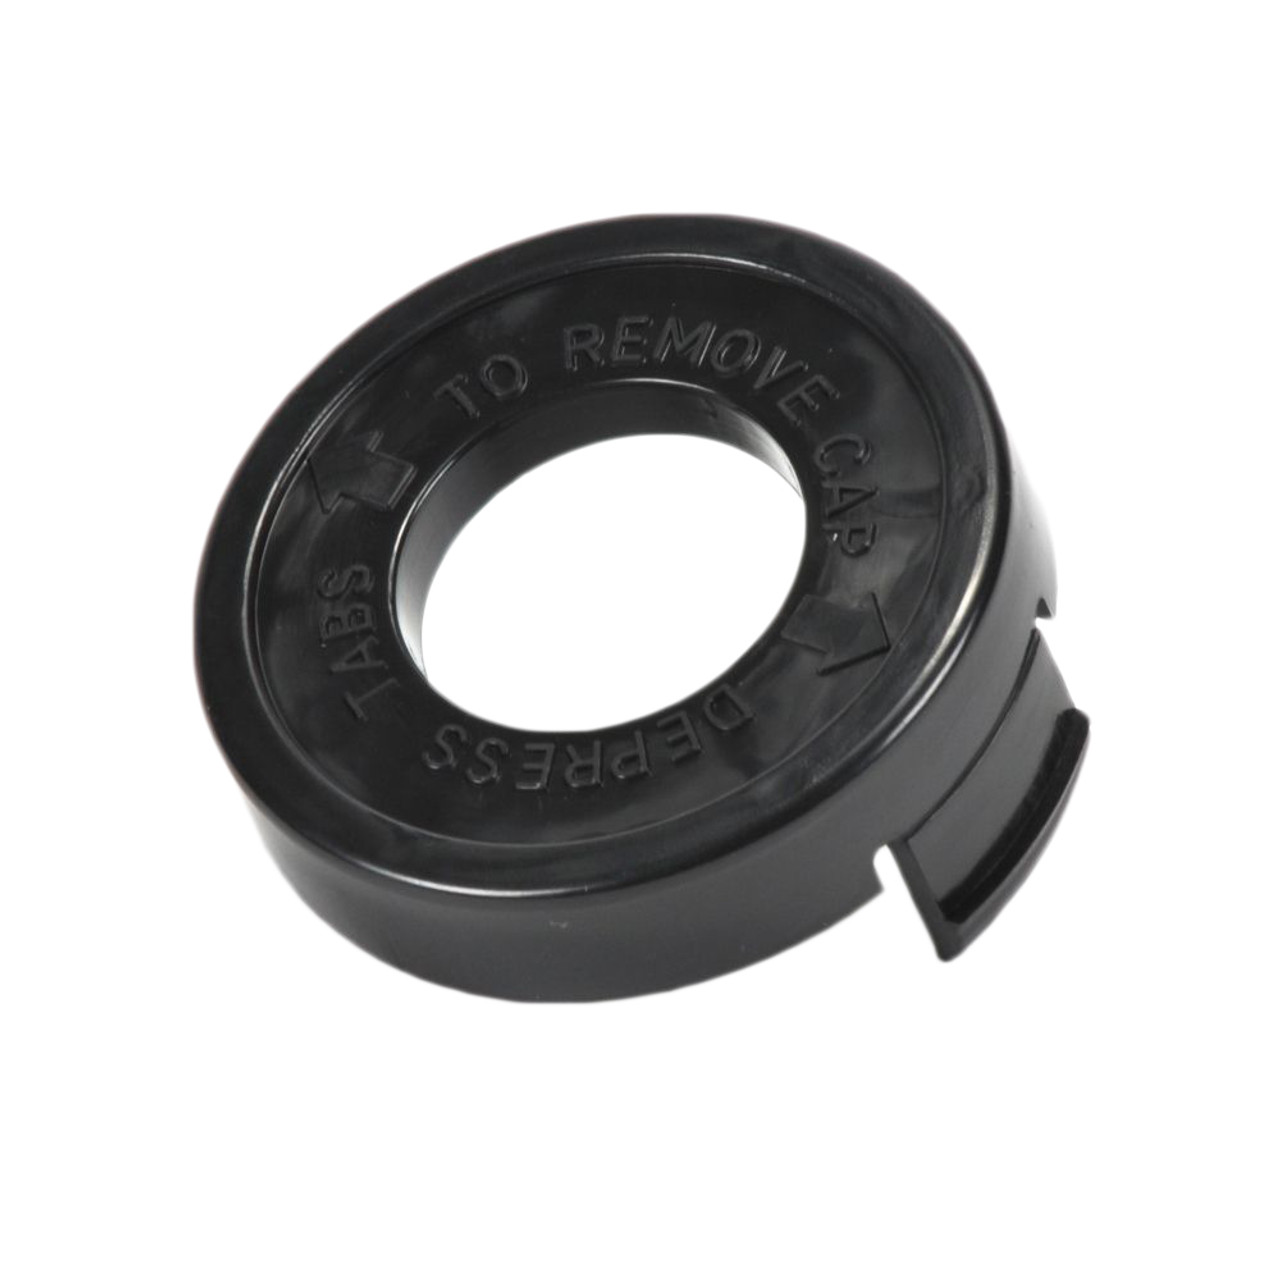 Replacement String Trimmer Bump Cap for ST4500 Black & Decke